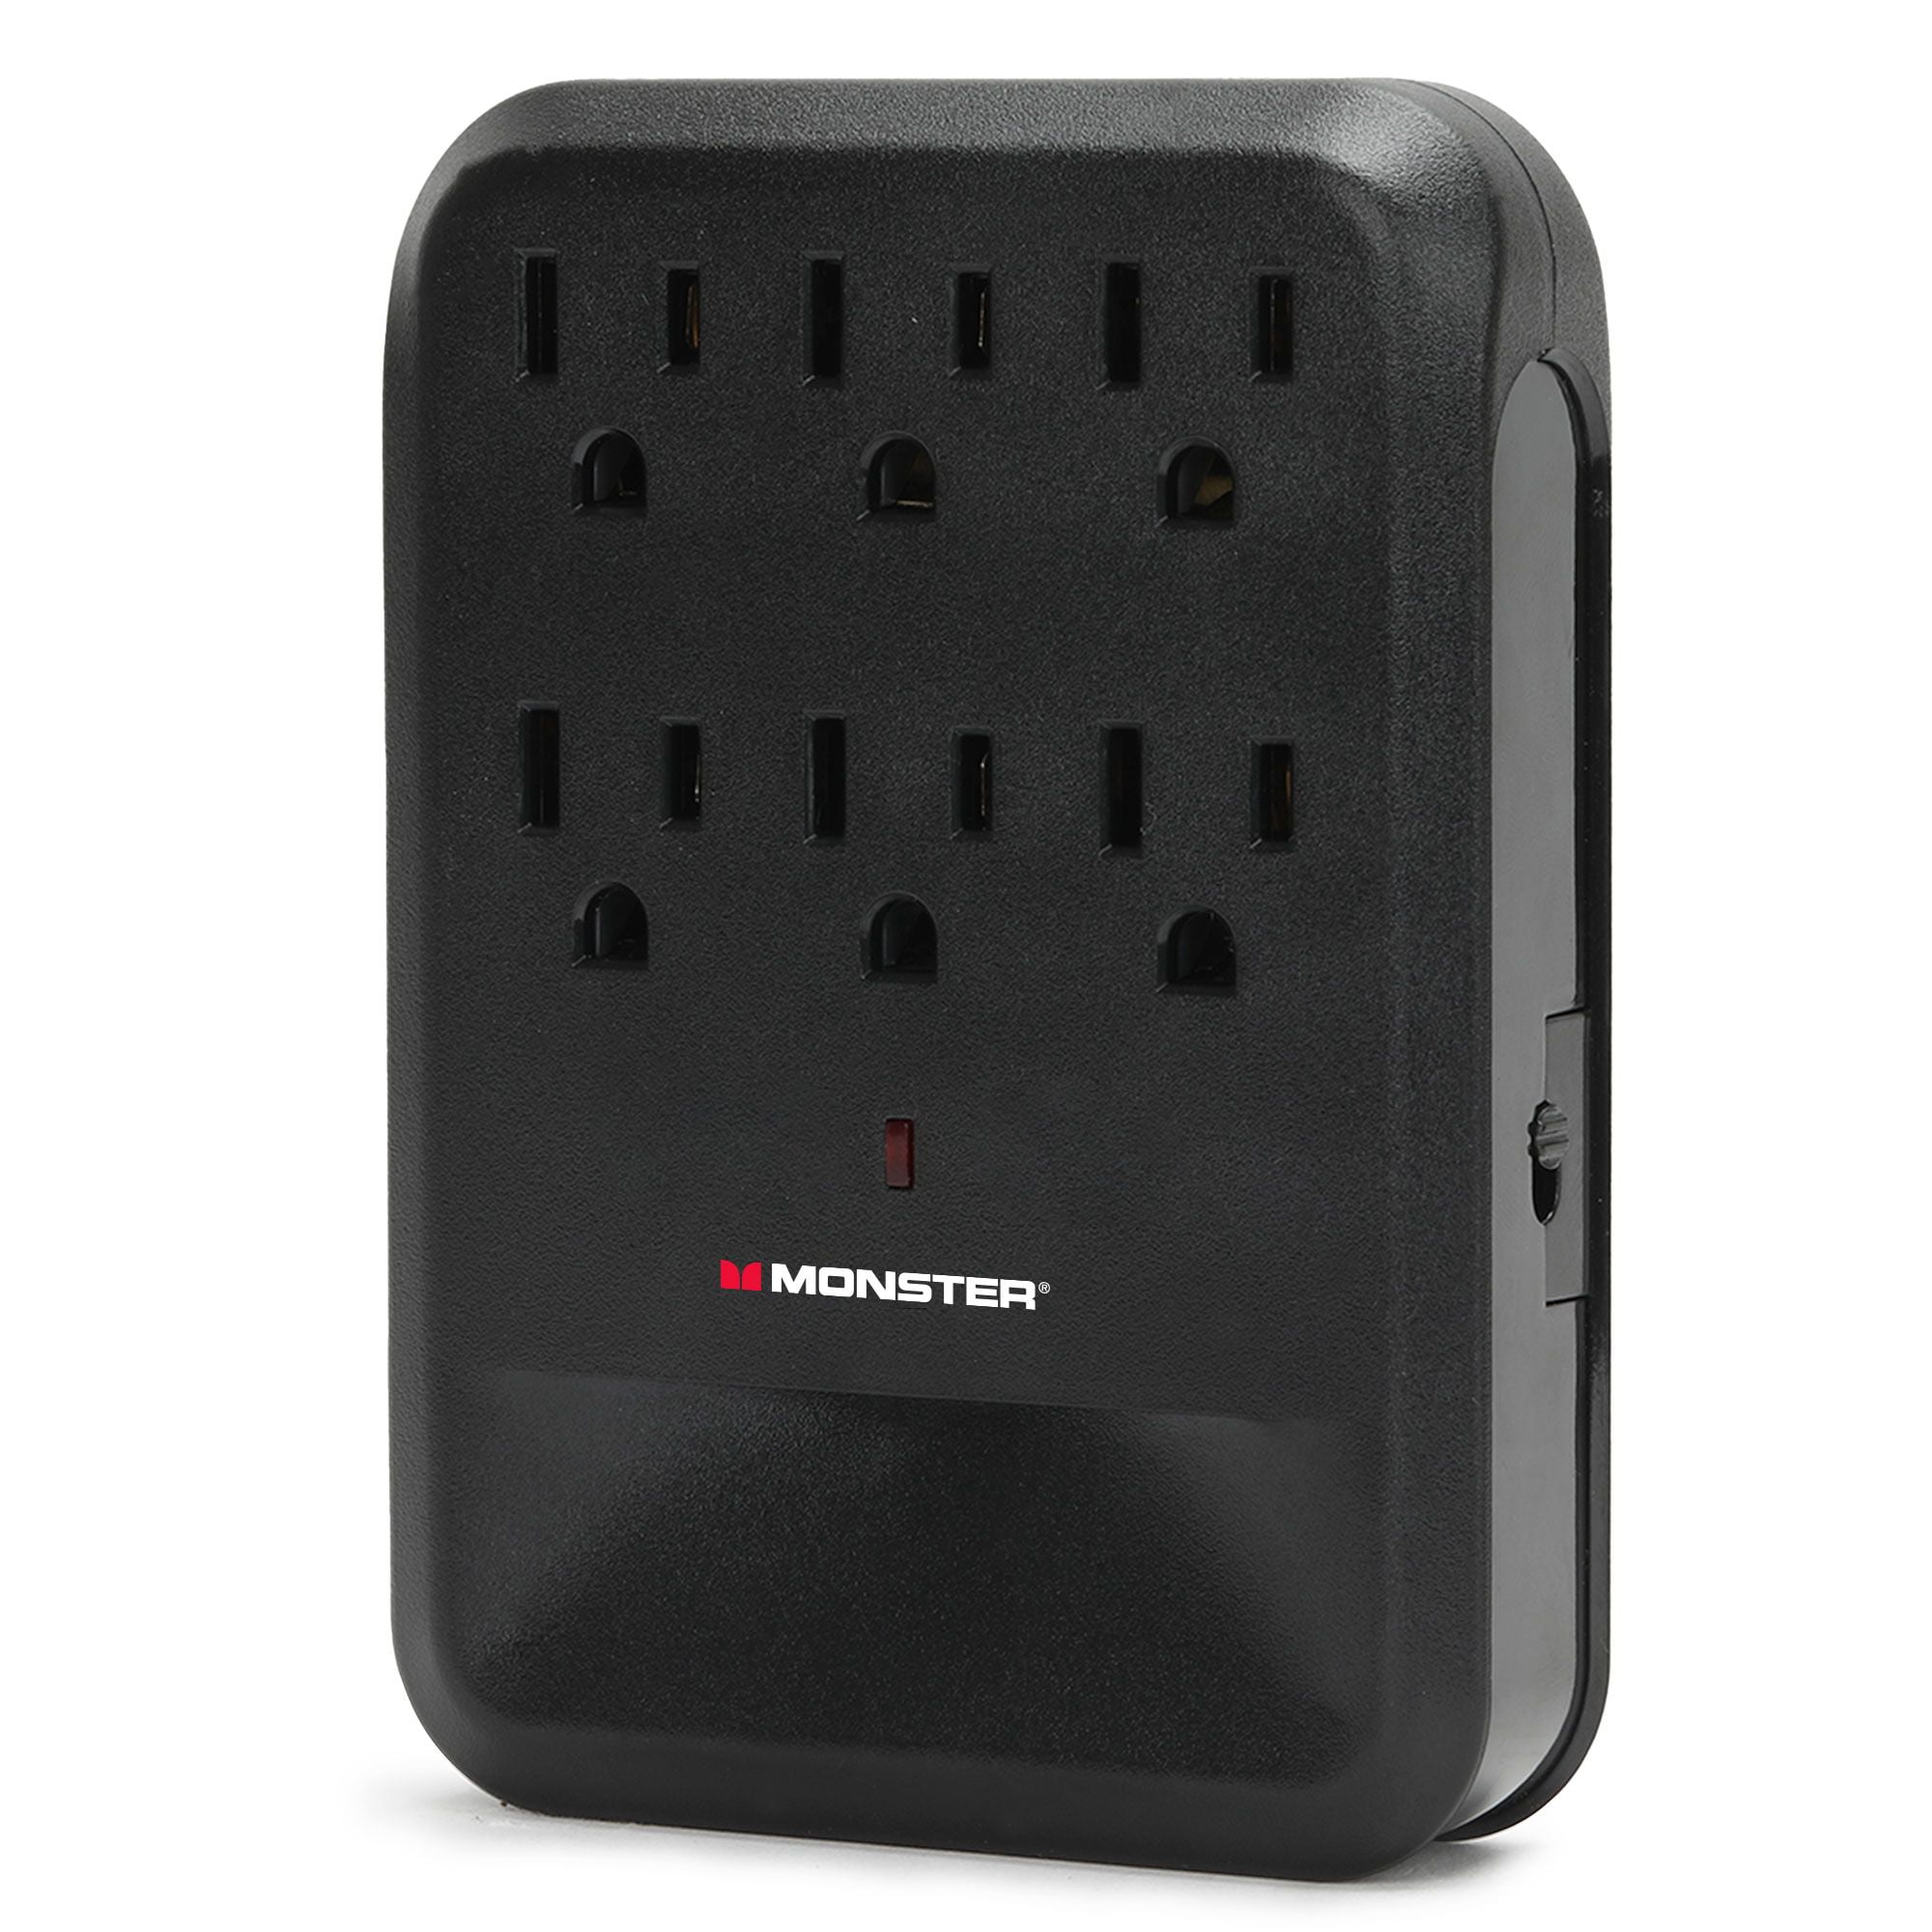 Monster 1200J Wall Tap Surge Protector: 6 Grounded Outlets